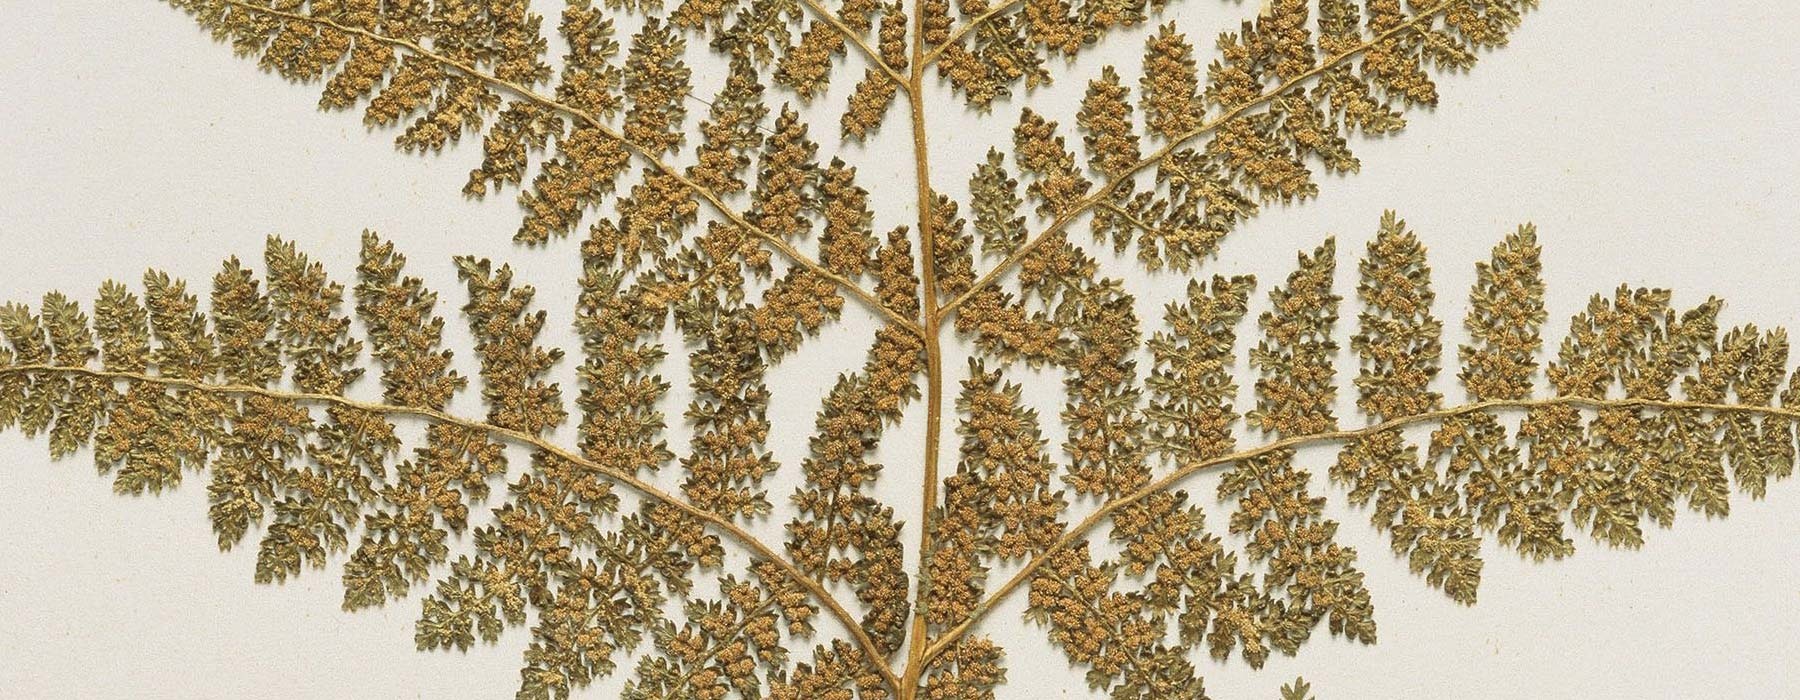 Thousand-leaved fern, Hypolepis millefolium Hook., collected 1888, New Zealand. Gift of The University of Western Ontario, Canada, 1967. Te Papa (P020070/J)